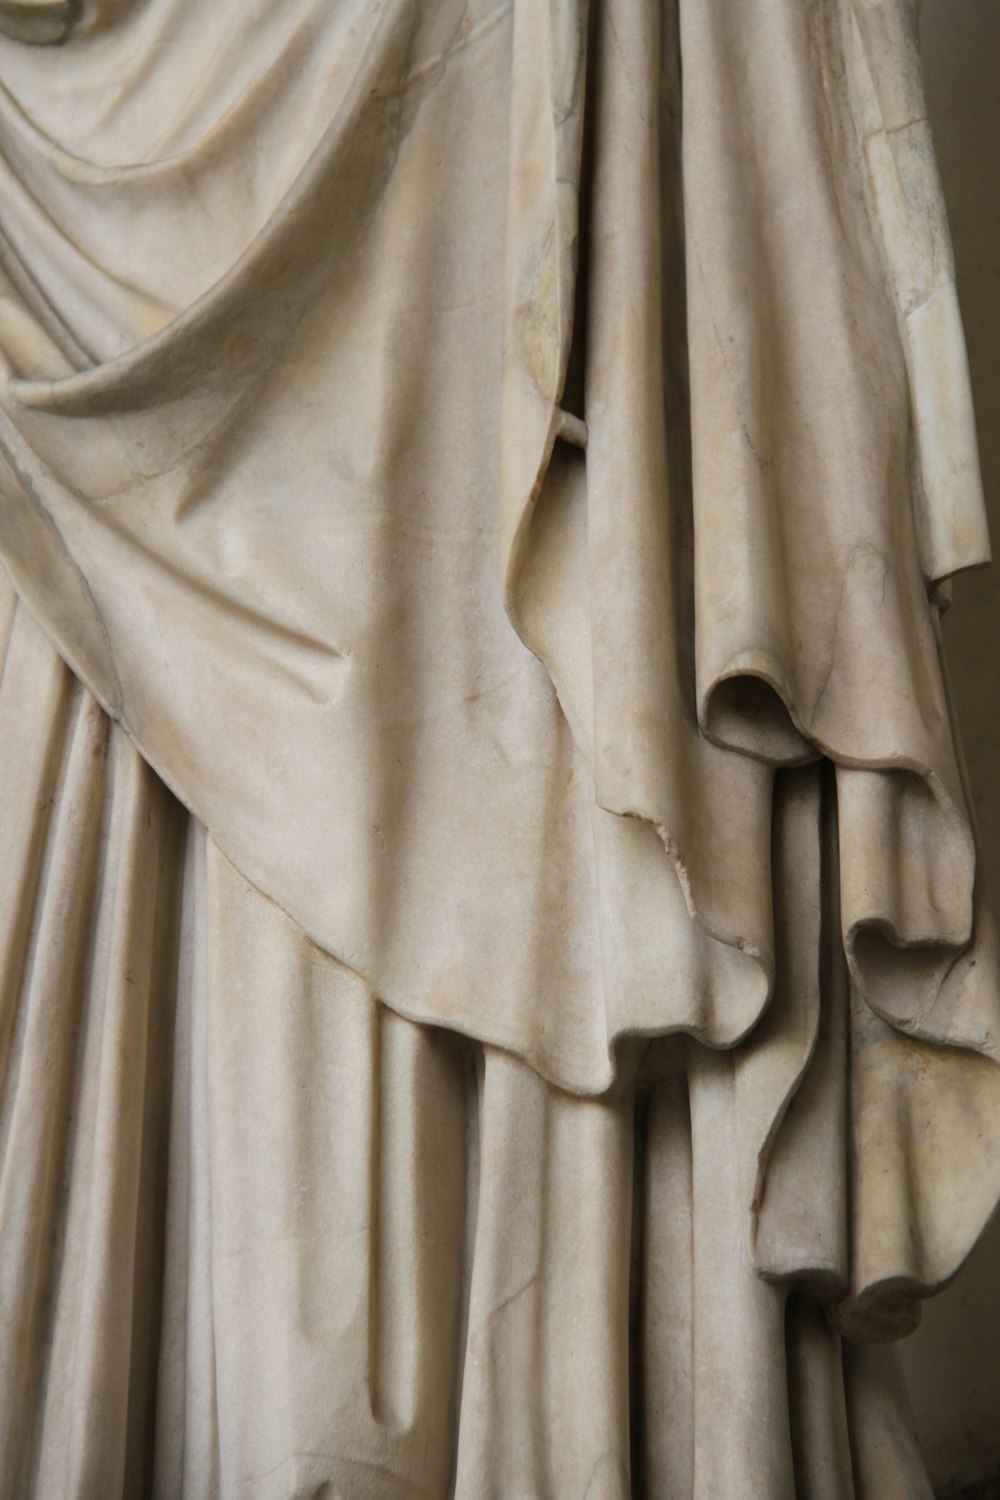 a close up of a statue with a curtain